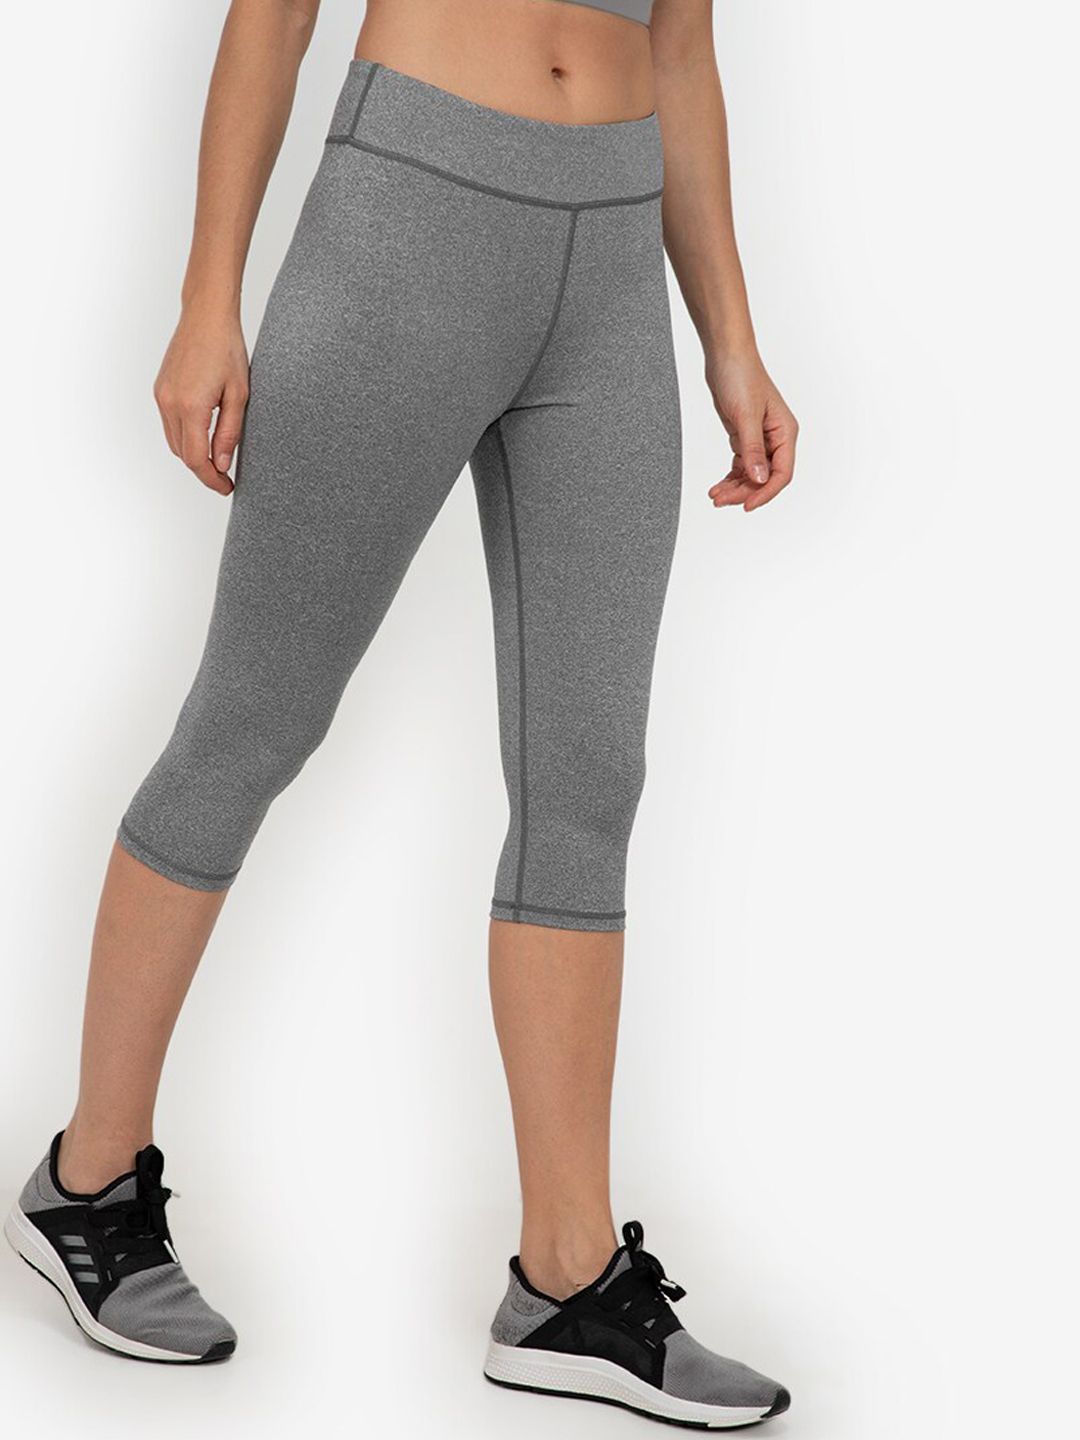 ZALORA ACTIVE Women Grey Solid Tights Price in India